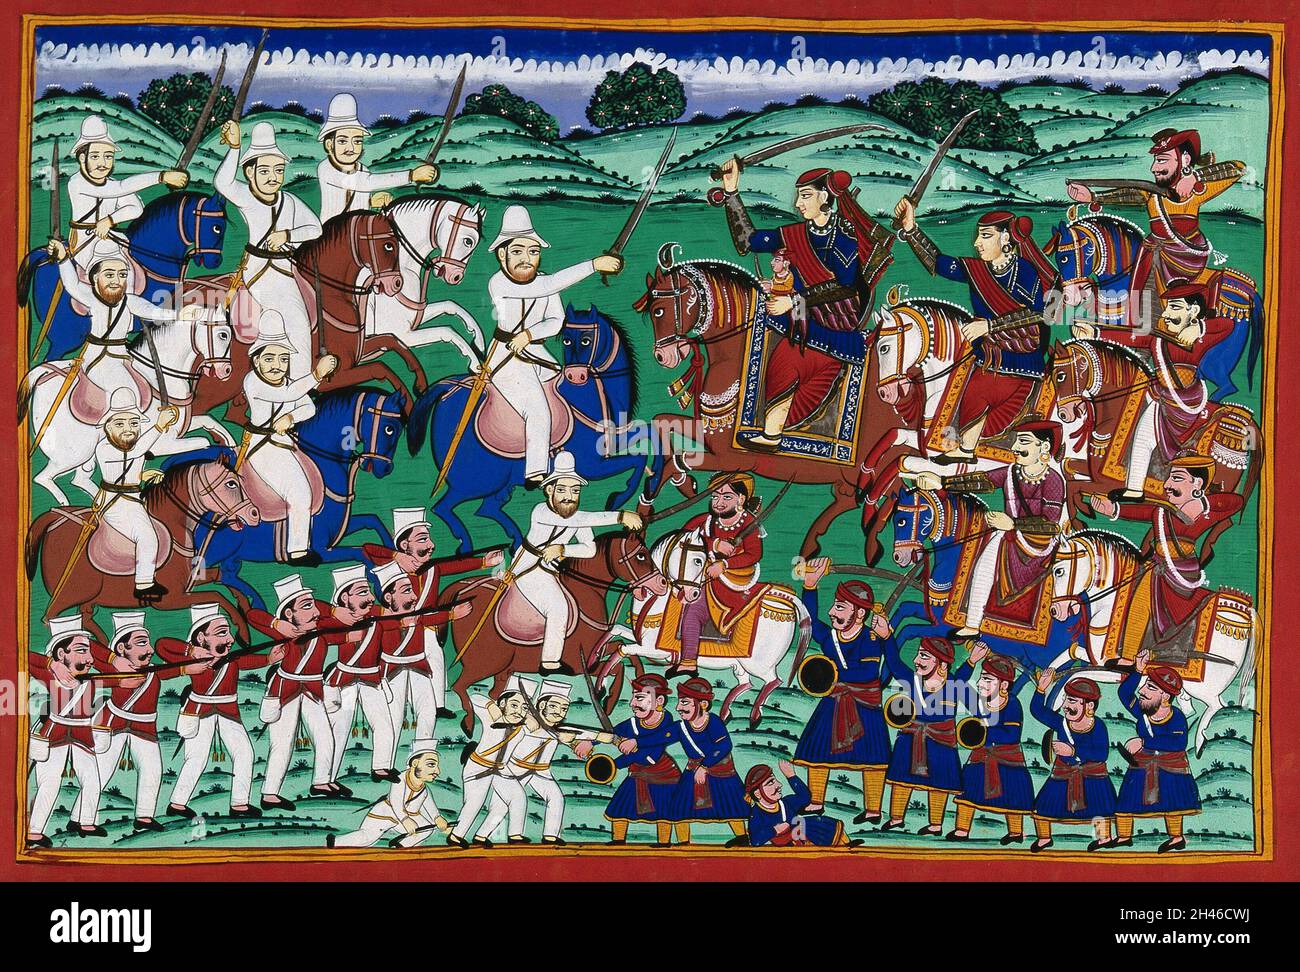 The Rani of Jhansi leads her troops in the siege of Jhansi fort. Gouache painting by an Indian painter, 18--. Stock Photo